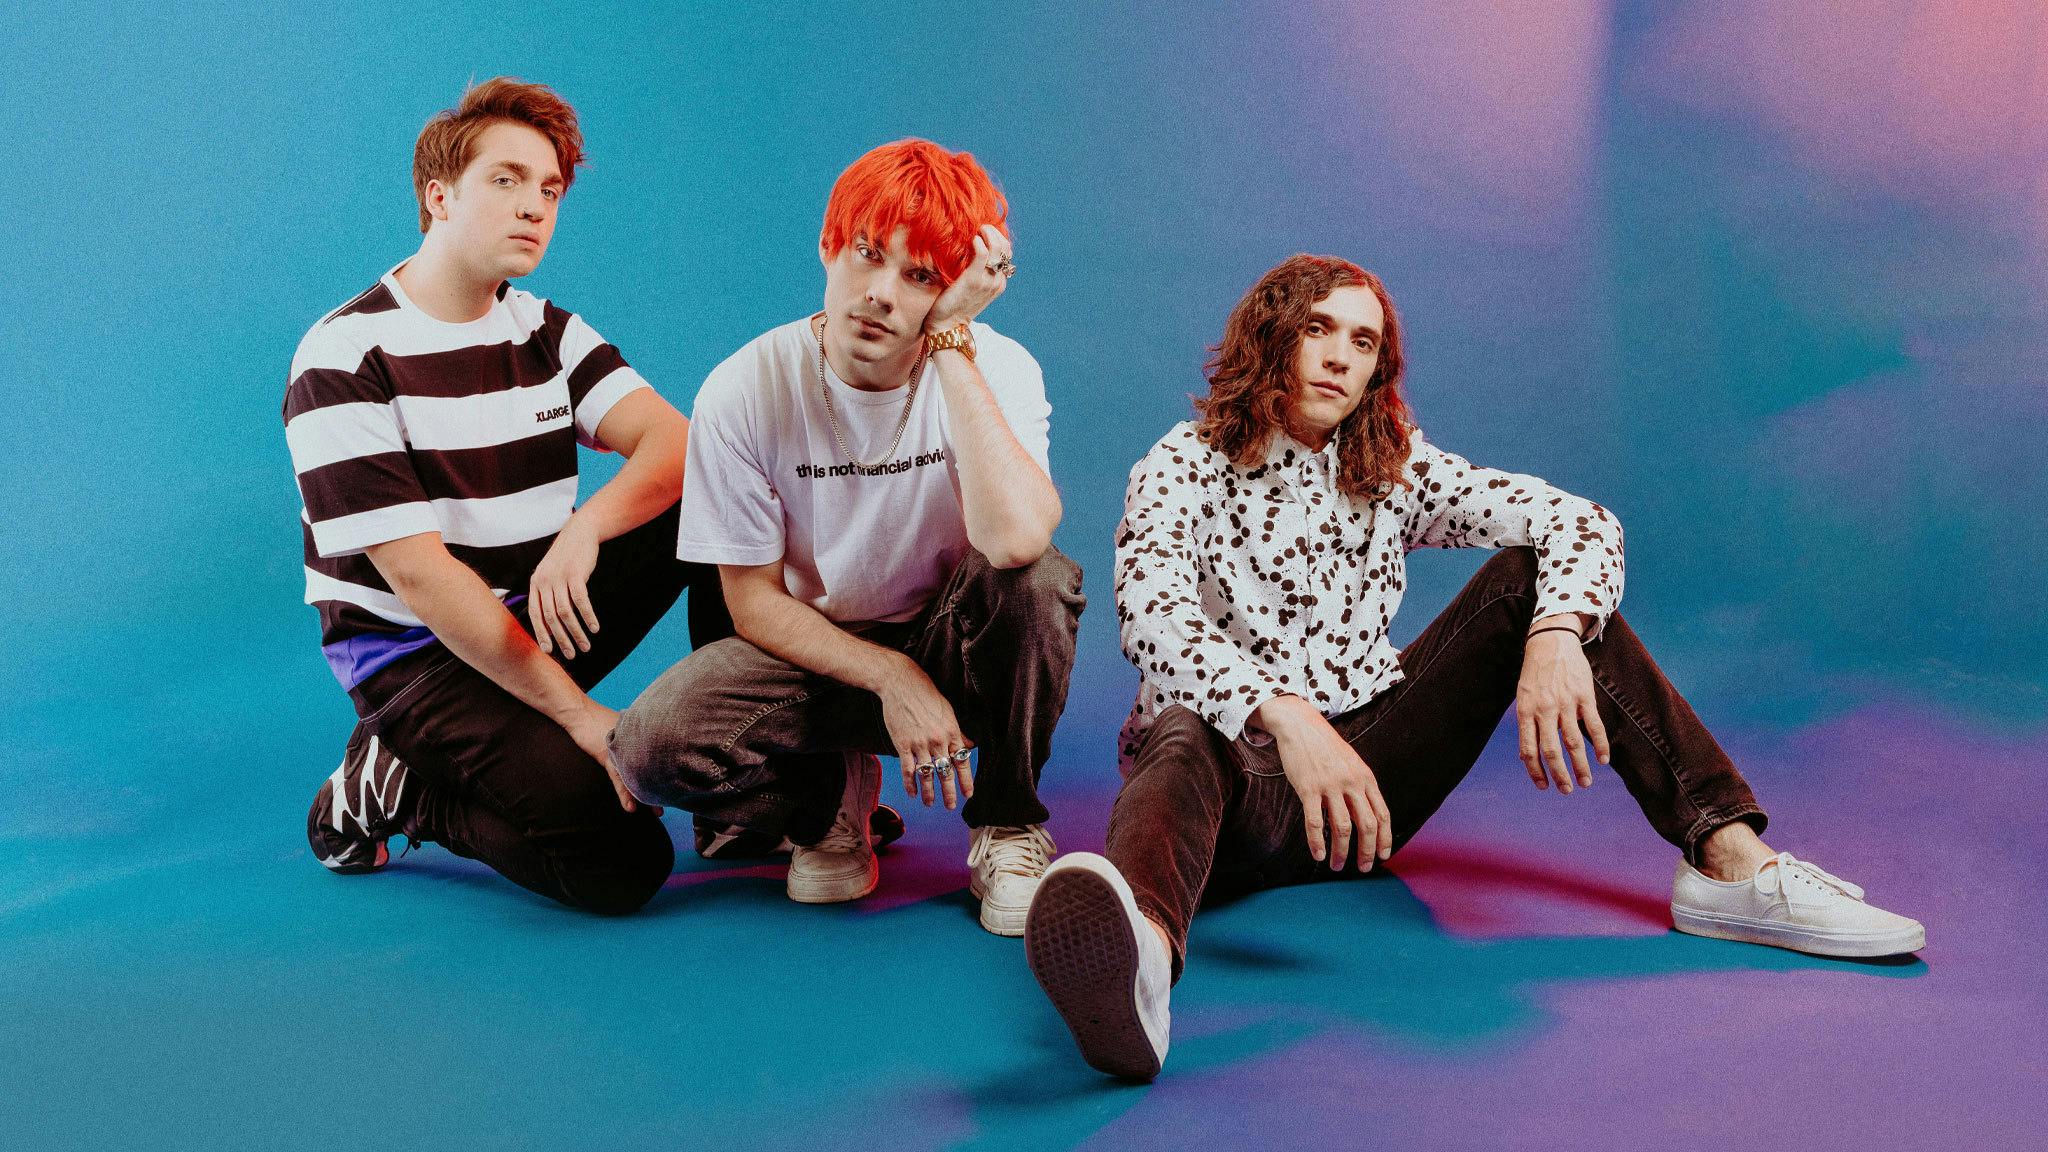 Get your signed copy of Waterparks’ new album INTELLECTUAL PROPERTY